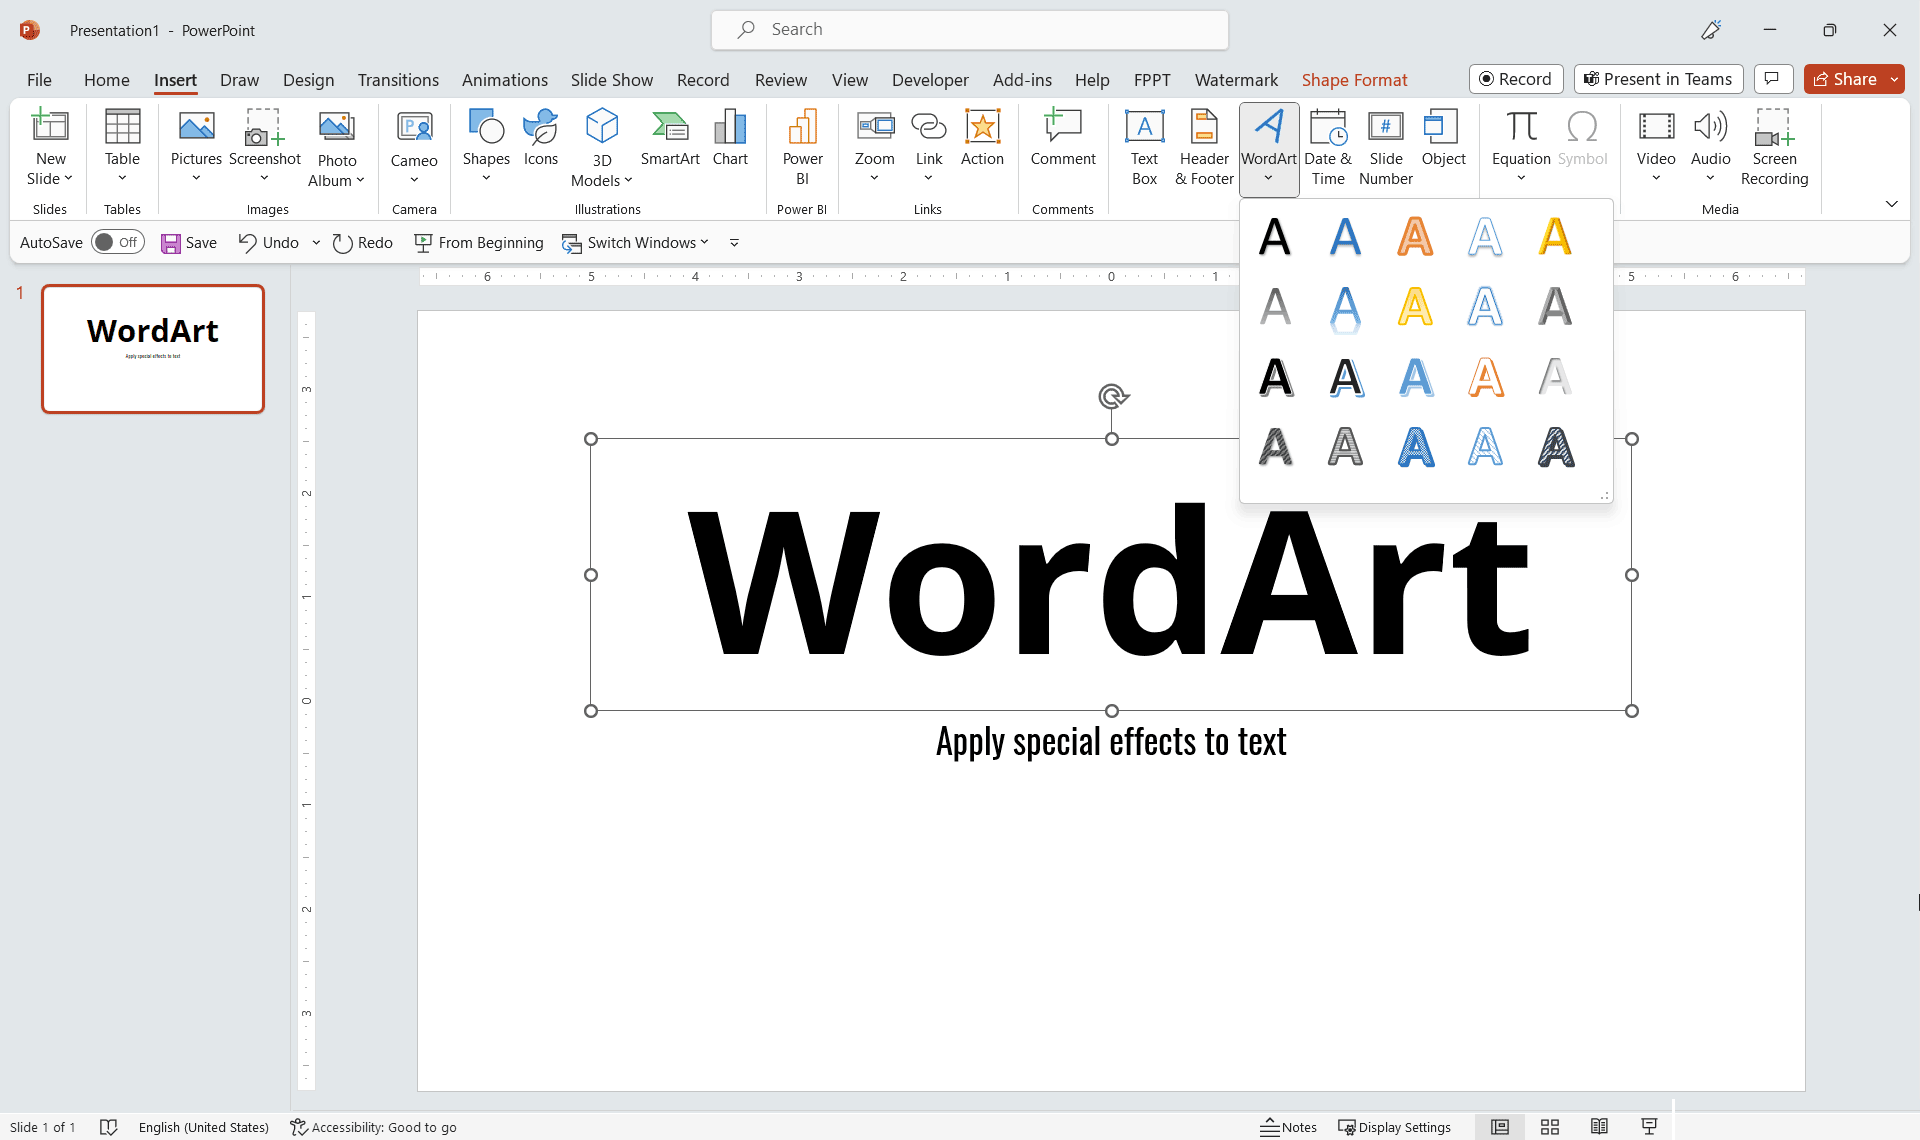 What is WordArt feature in PowerPoint